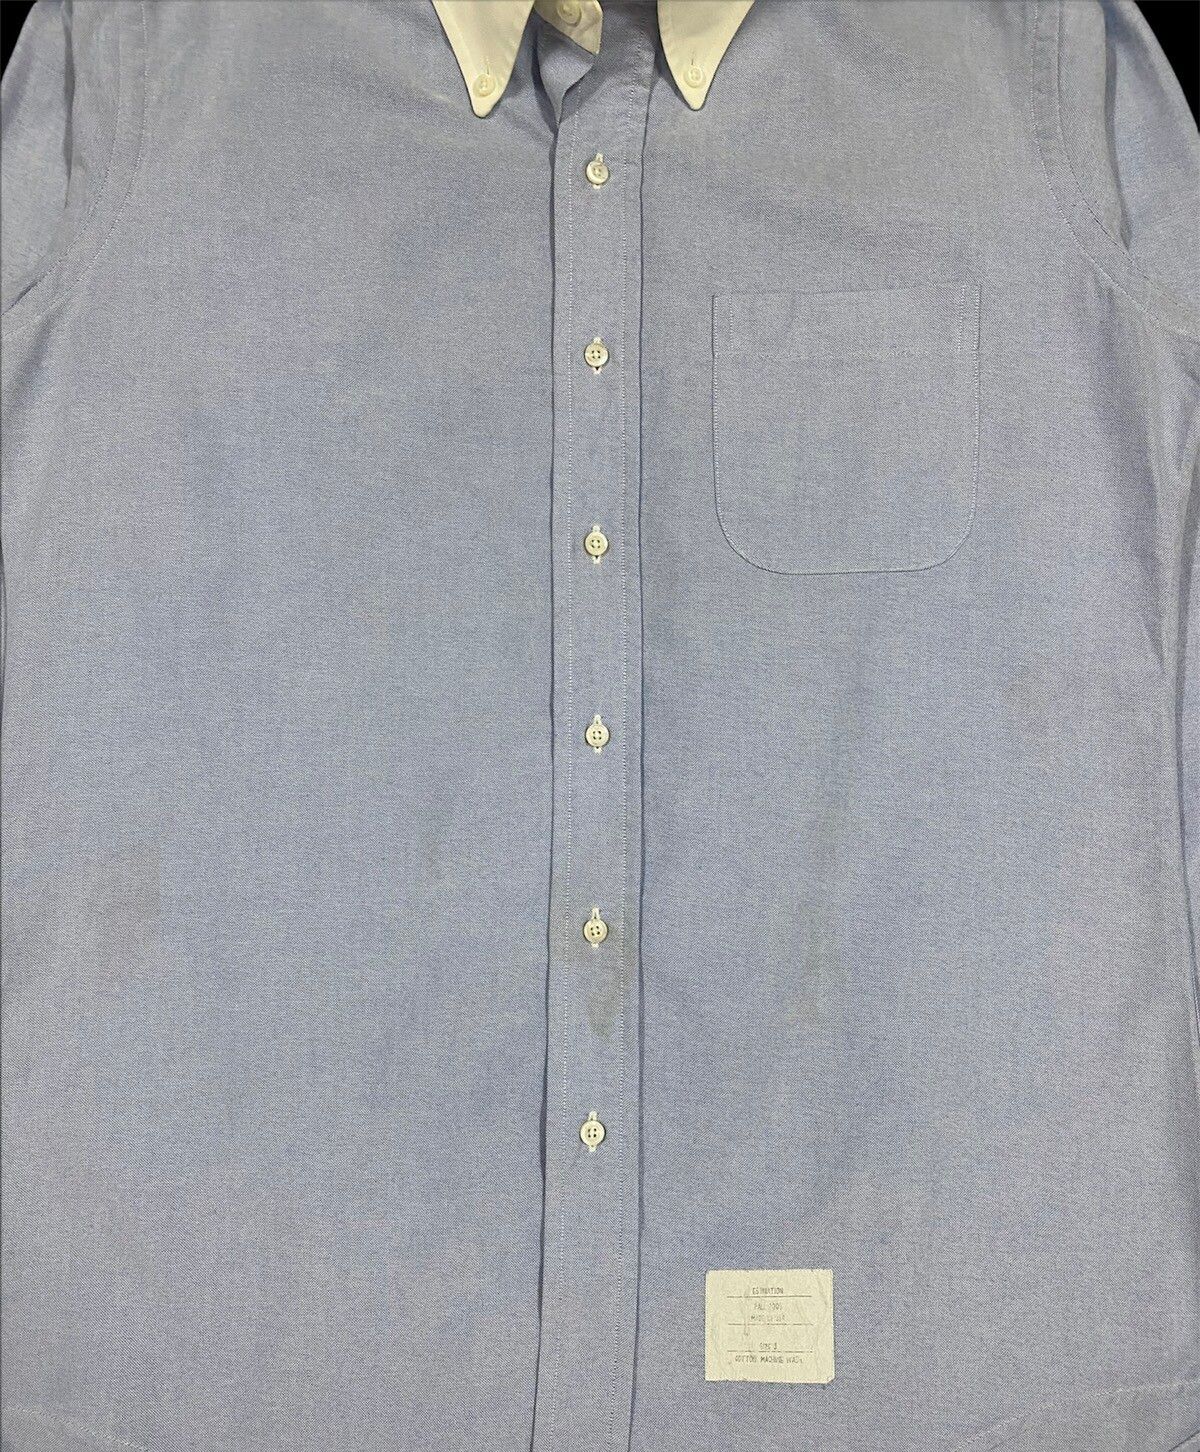 Authentic🔥Thom Browne Blue Oxford Button Down Shirt Size 3 - 7